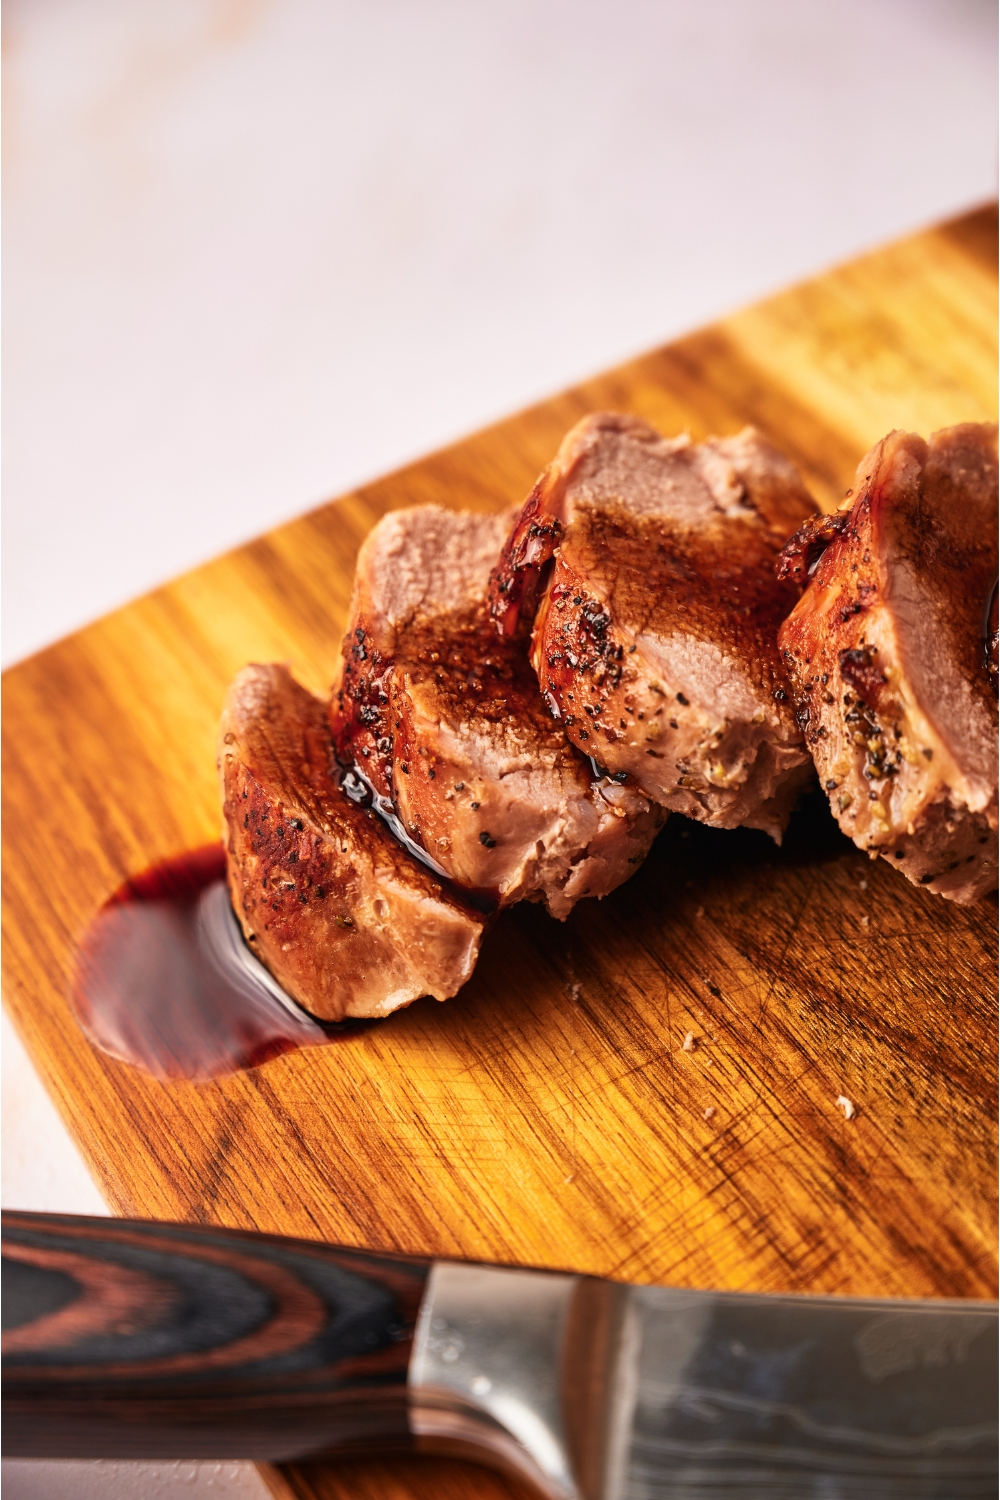 Close up of cooked pork tenderloin coated in a brown sauce atop a wood cutting board.